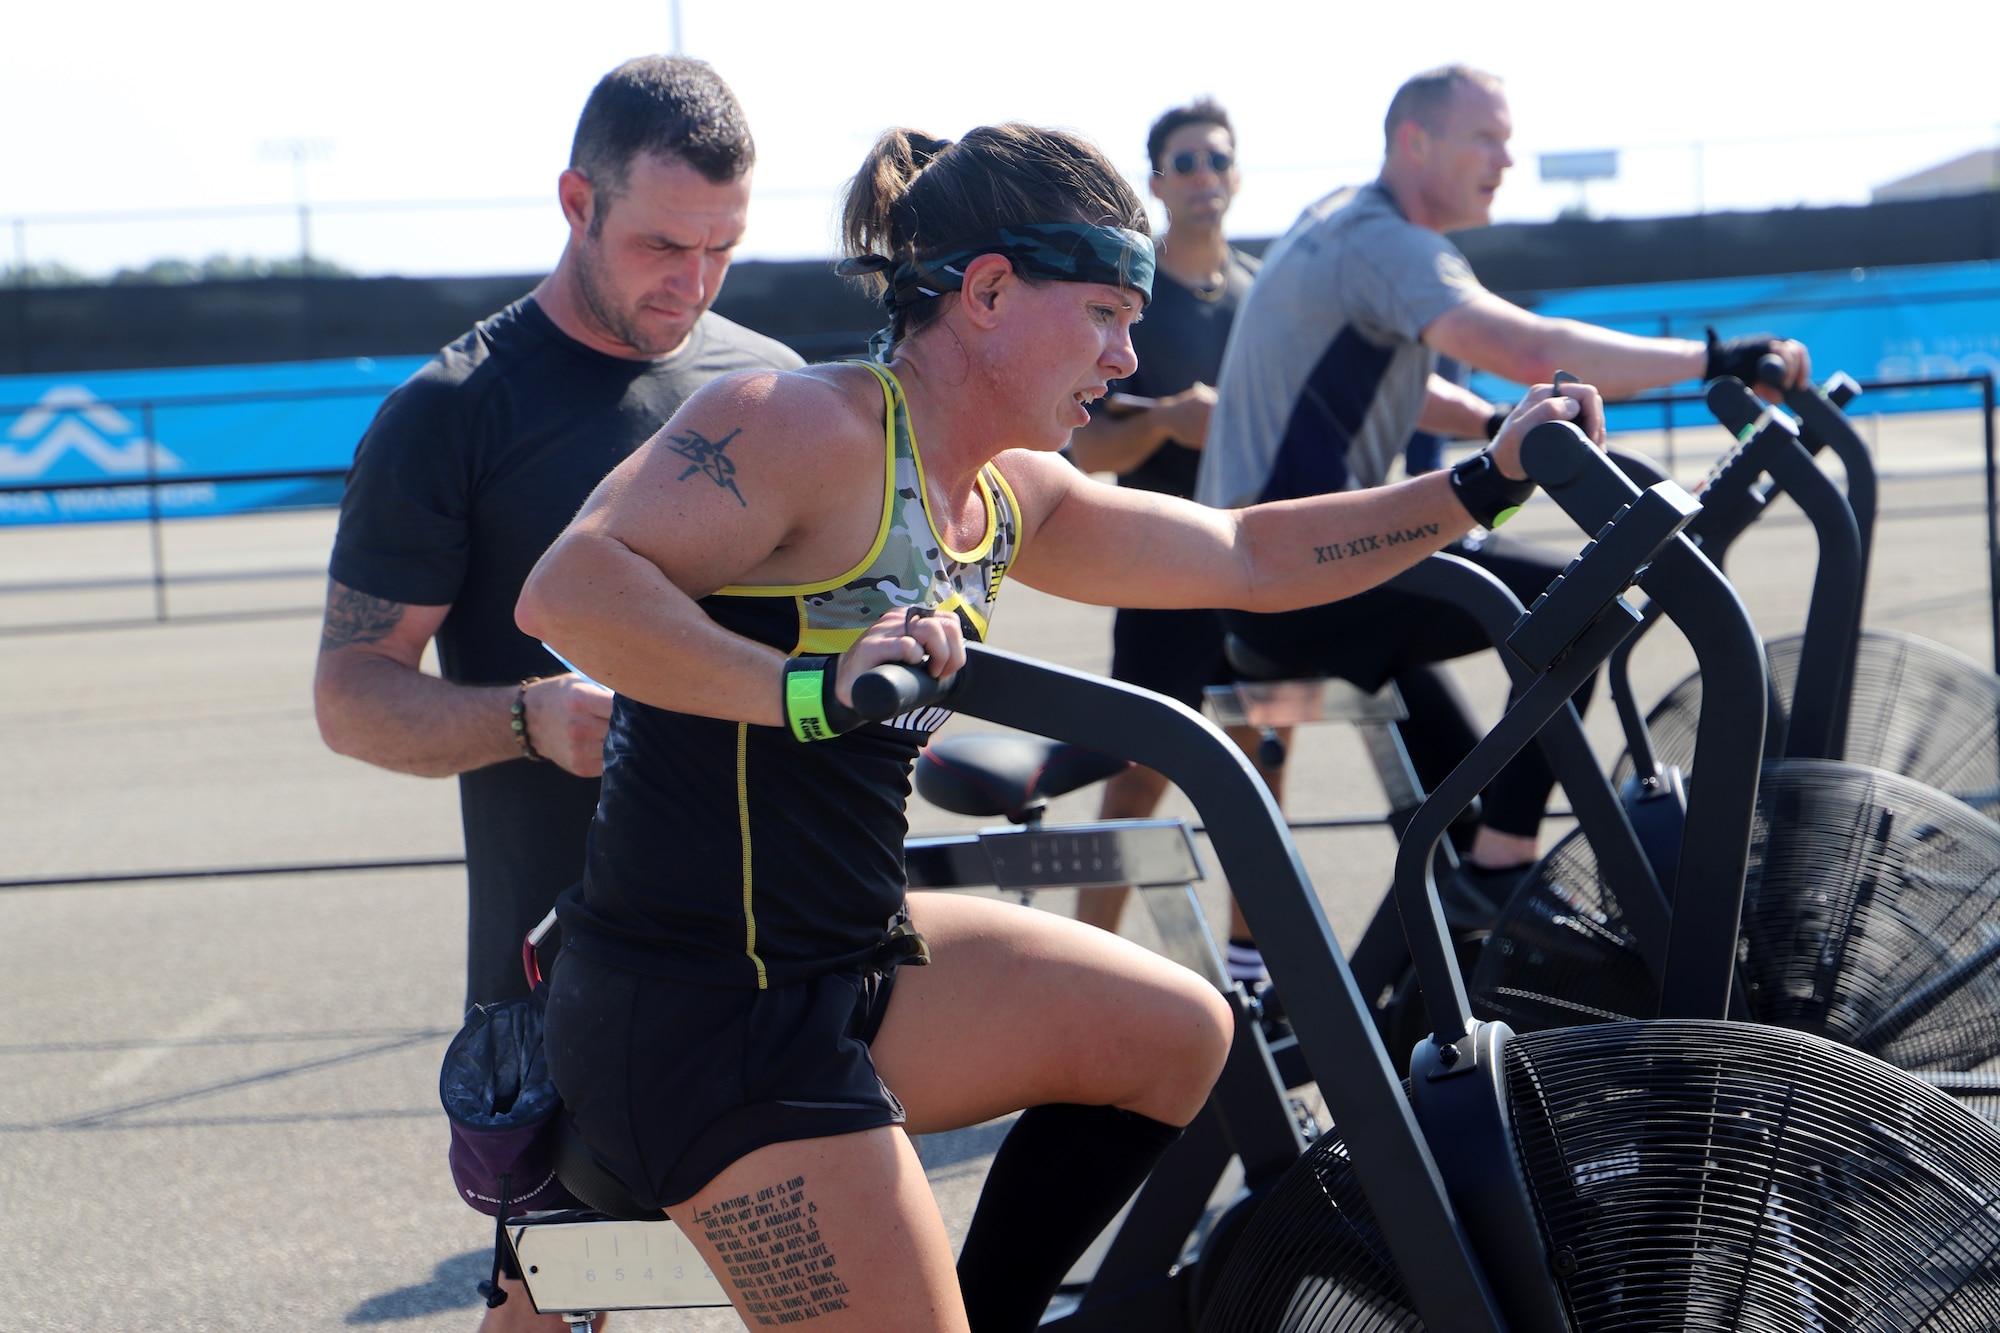 U.S. Army Sgt. Bawnie Sutton pedals an air bike during her heat of the 2019 Alpha Warrior Inter-Service Battle Sept. 14, 2019, at Retama Park, Selma, Texas. Sutton and her five team mates finished the competition in second place, behind the U.S. Air Force. The U.S. Navy finished third. (U.S. Air Force photo by Victoria Ribiero)